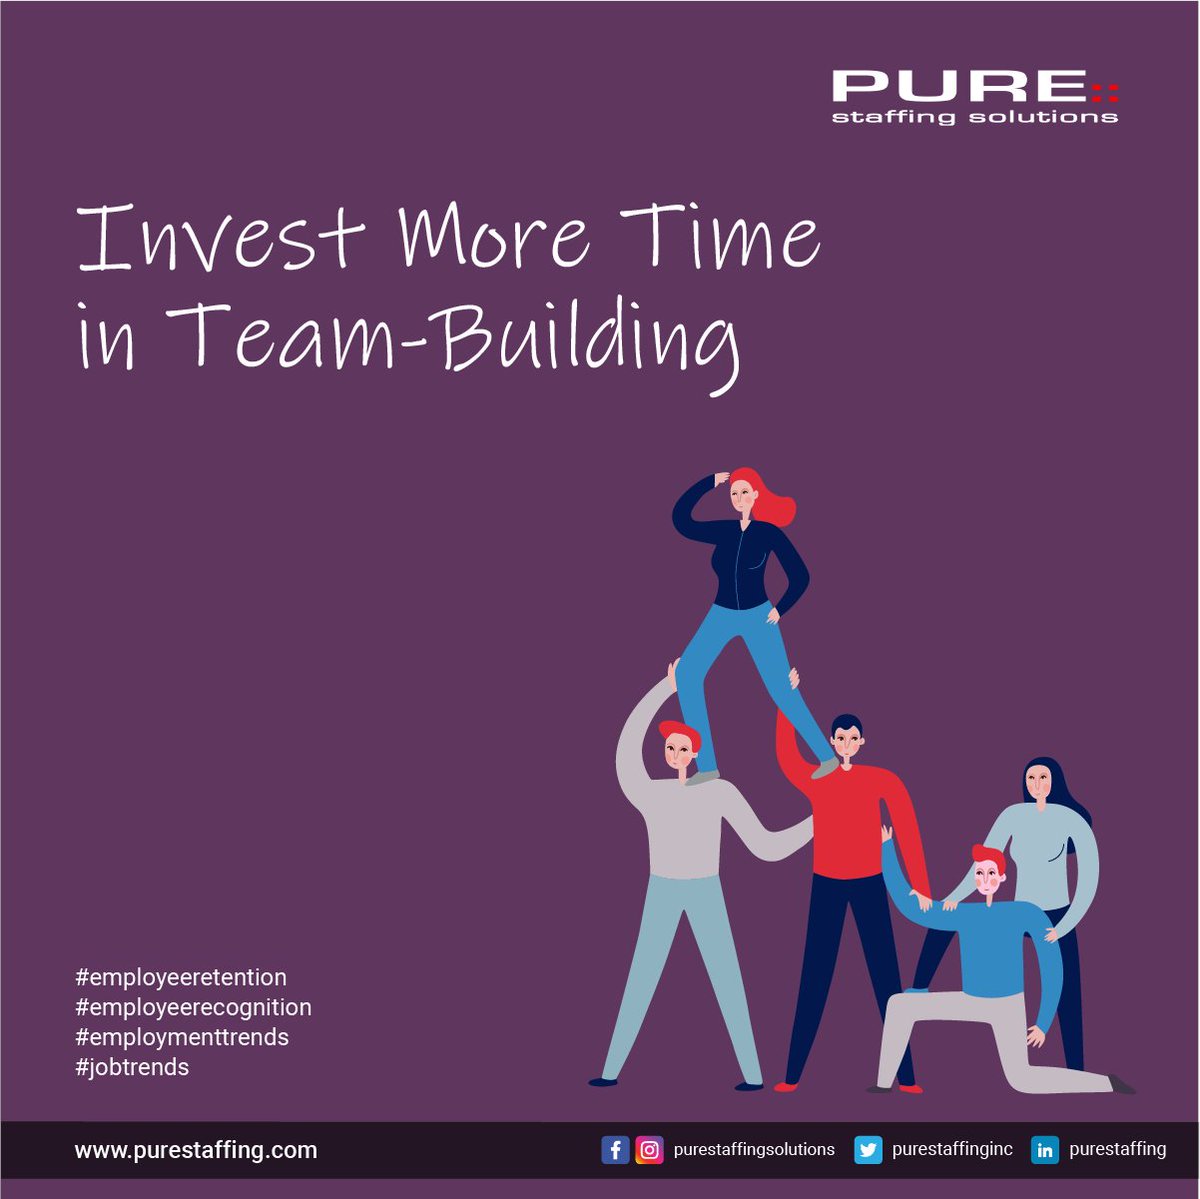 Invest More Time in Team-Building

#employeeengagement #employeerecognition #employeeretention #employmenttrends #jobtrends